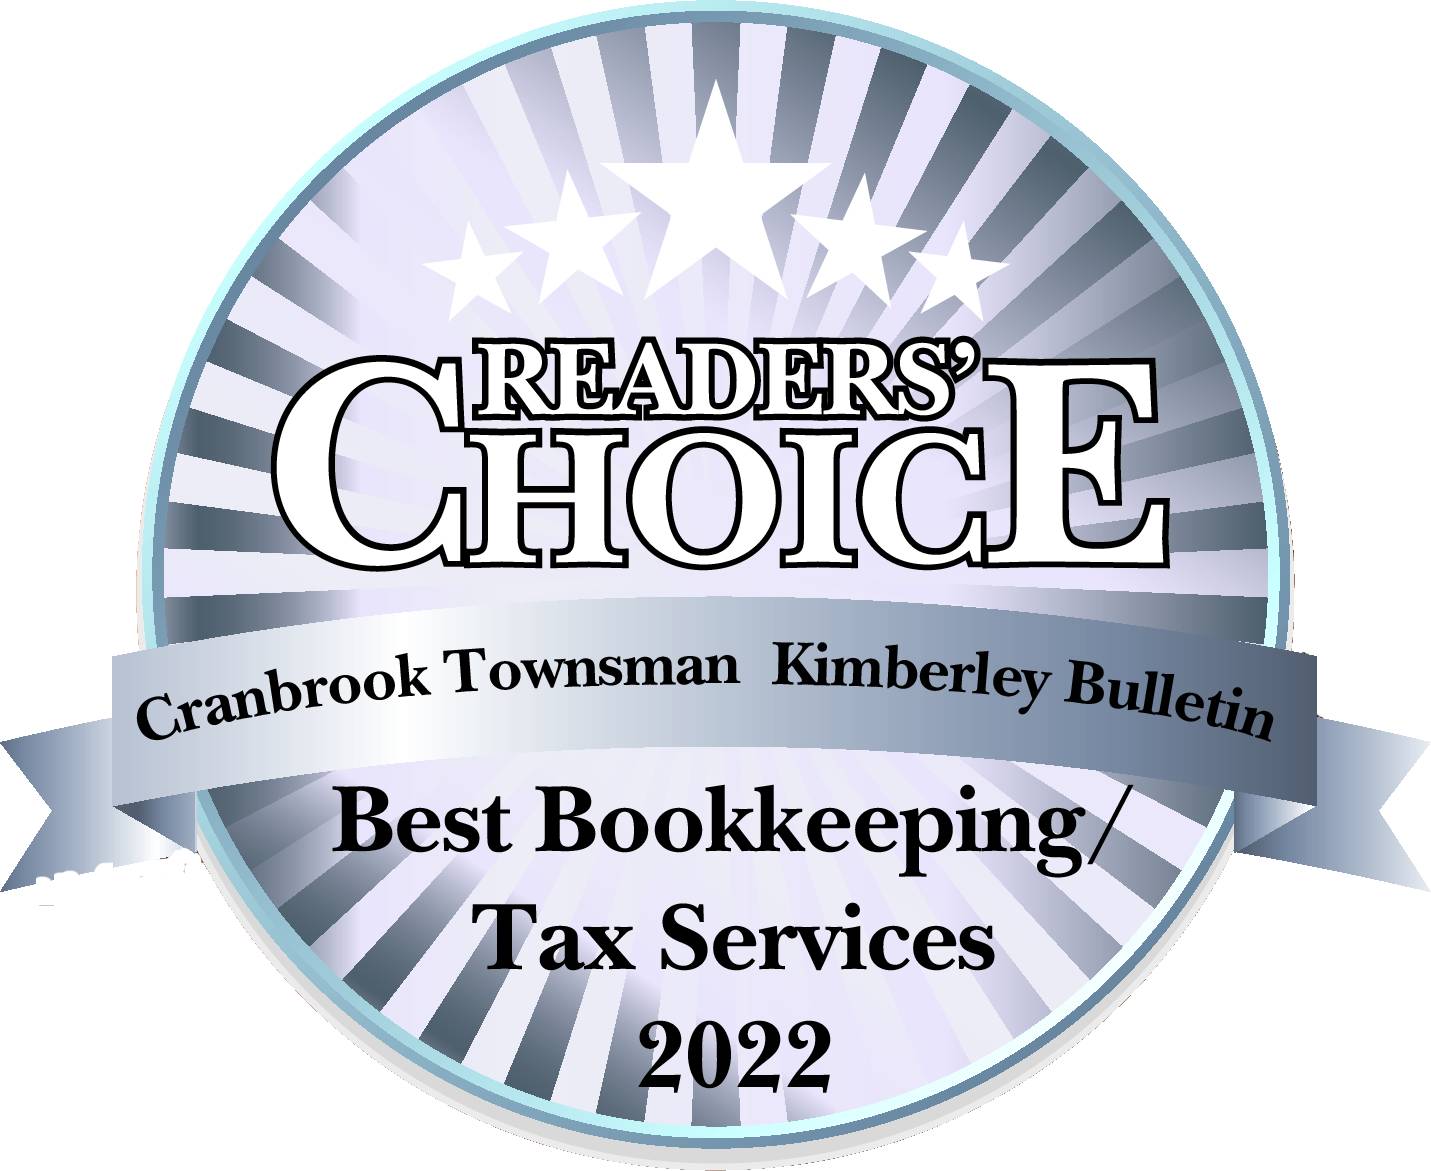 Best Book Keeping and Tax Services 202